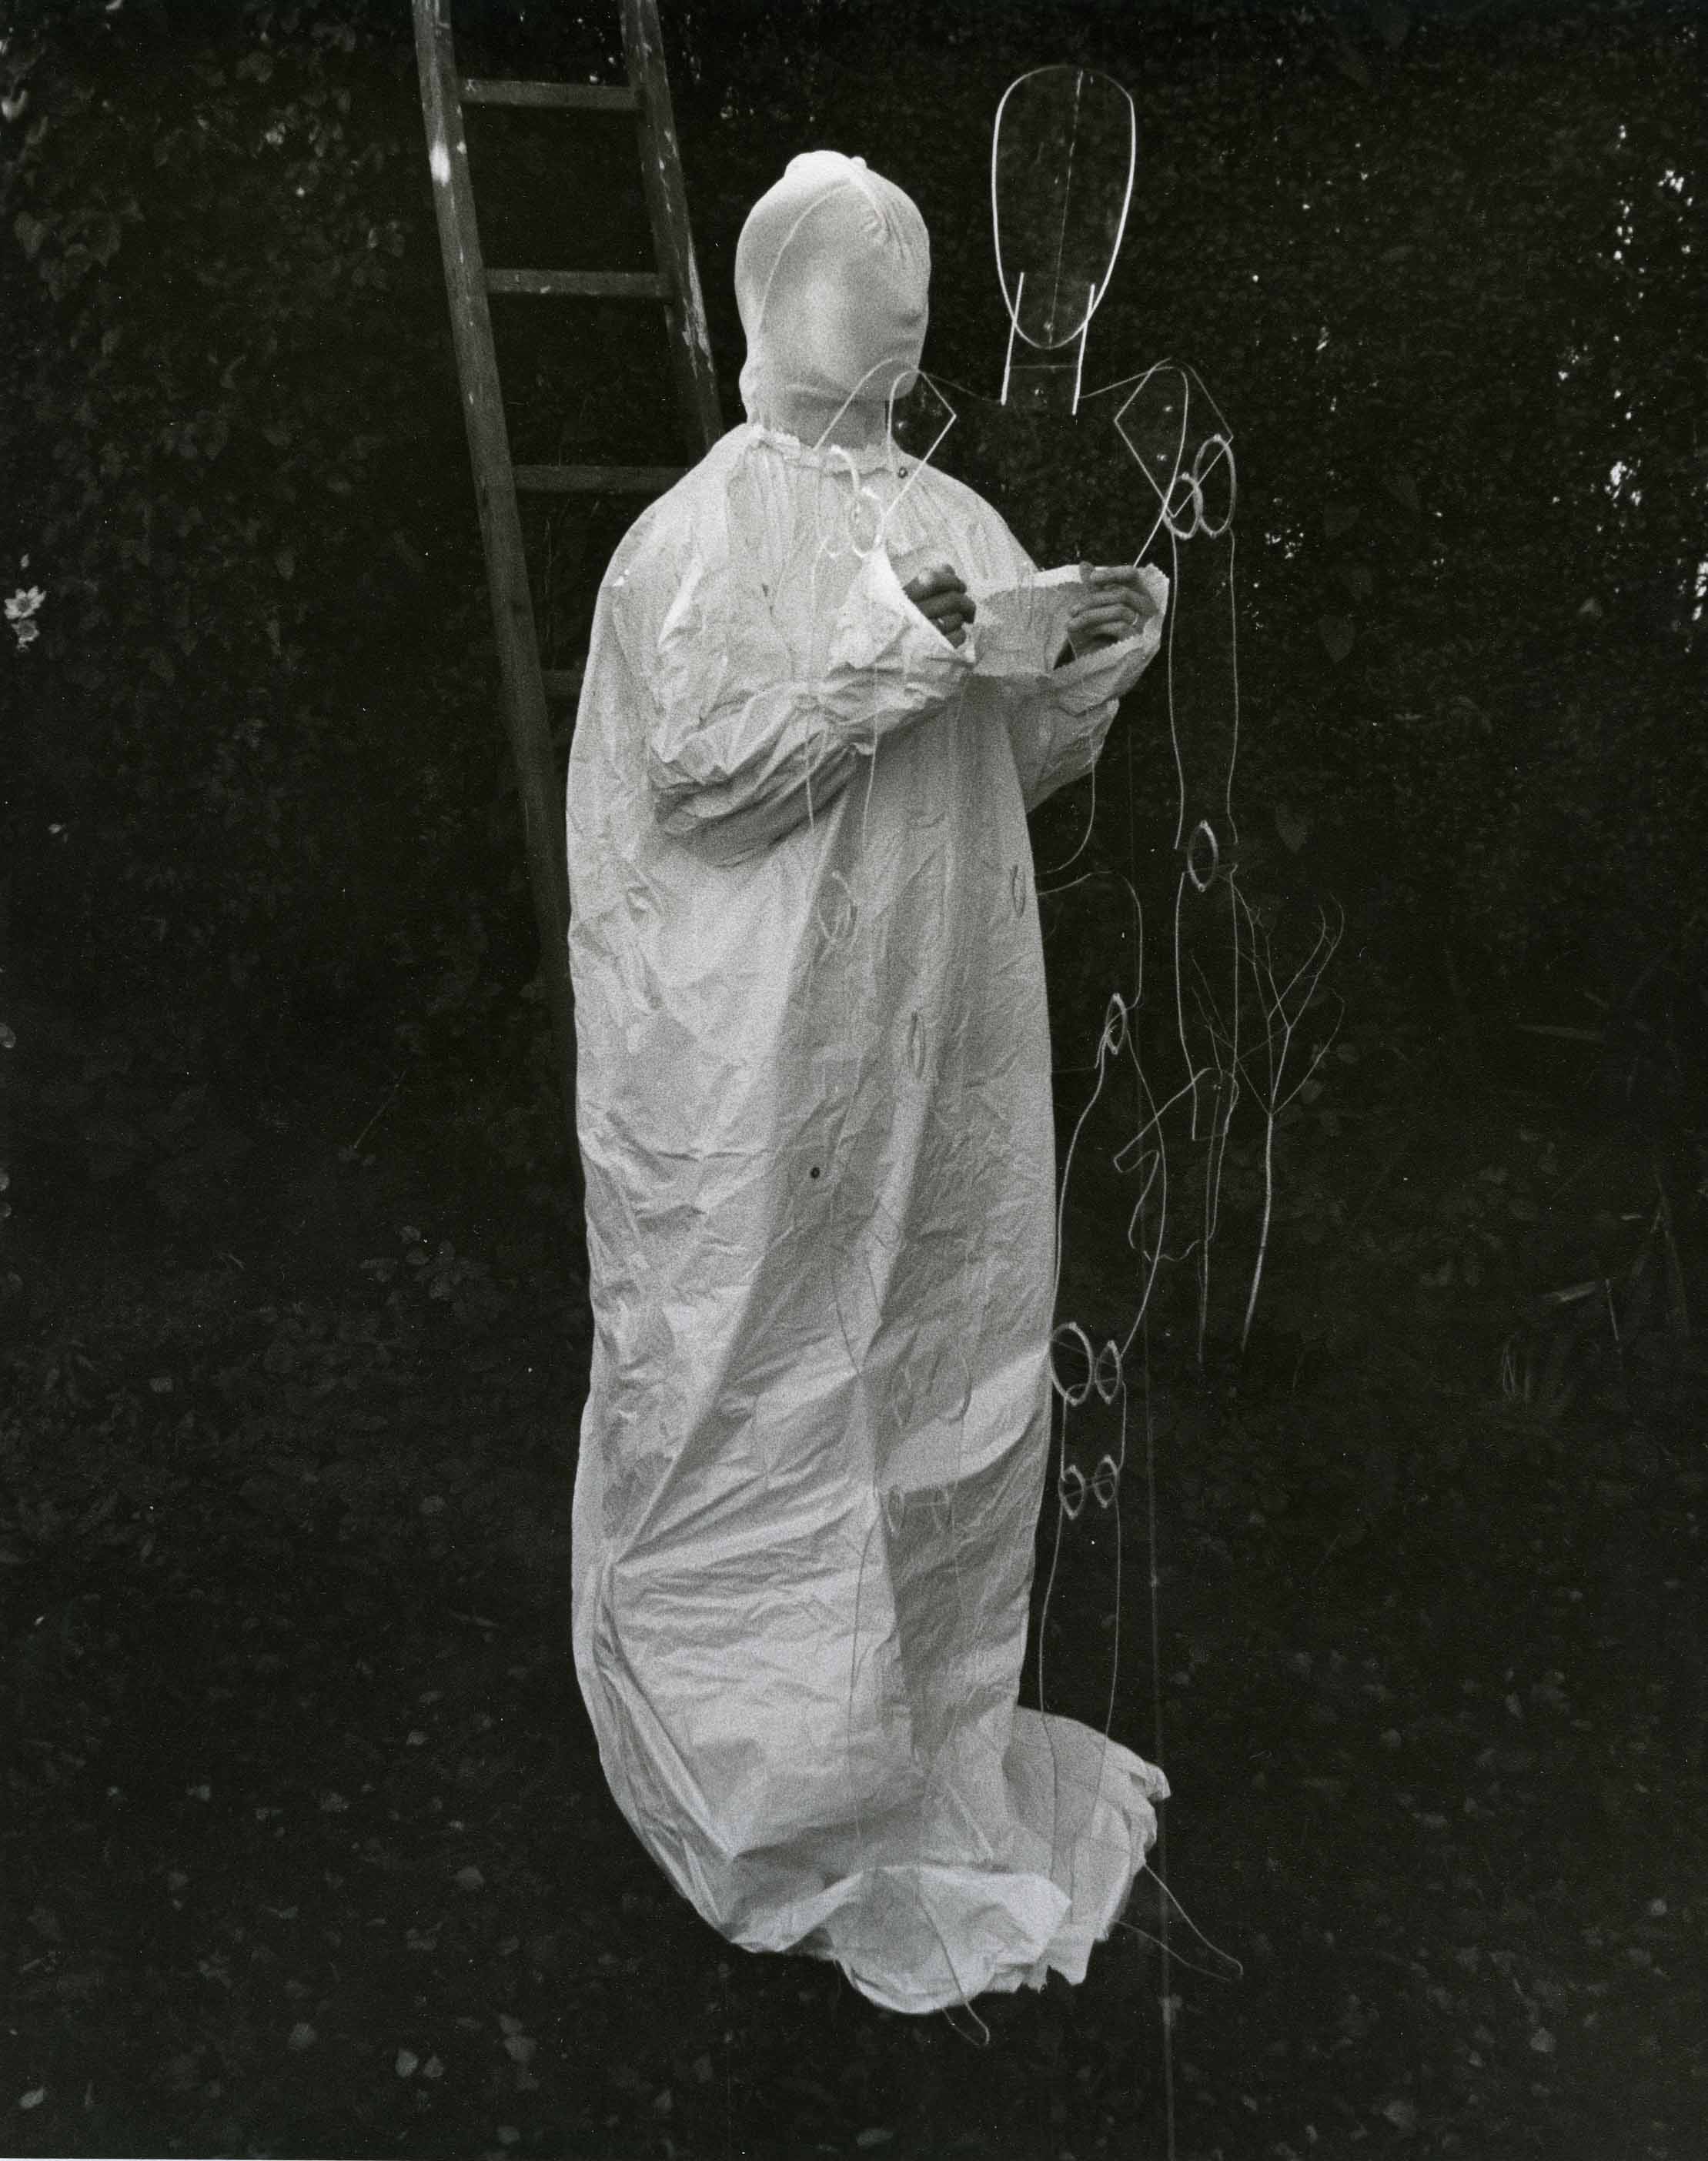  Fig. 1 Elaine Shemilt, iamdead, 1974, photograph from the set. Courtesy of the artist